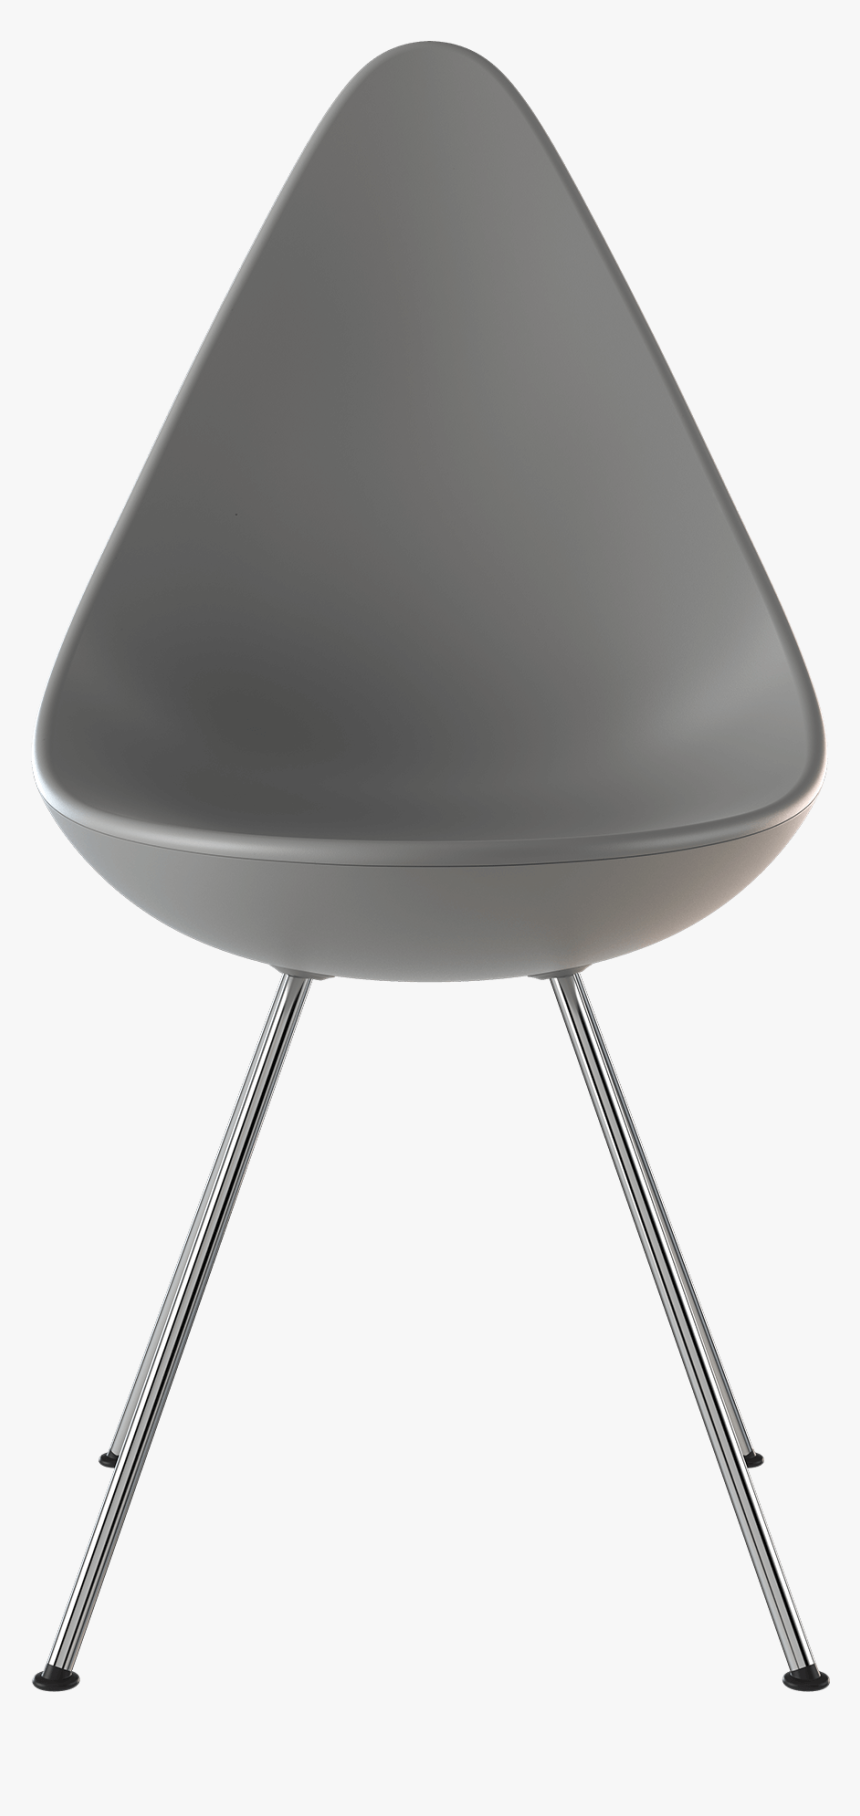 The Drop Chair By Arne Jacobsen In The Color Nine Grey - Fritz Hansen Drop Chair Grey, HD Png Download, Free Download